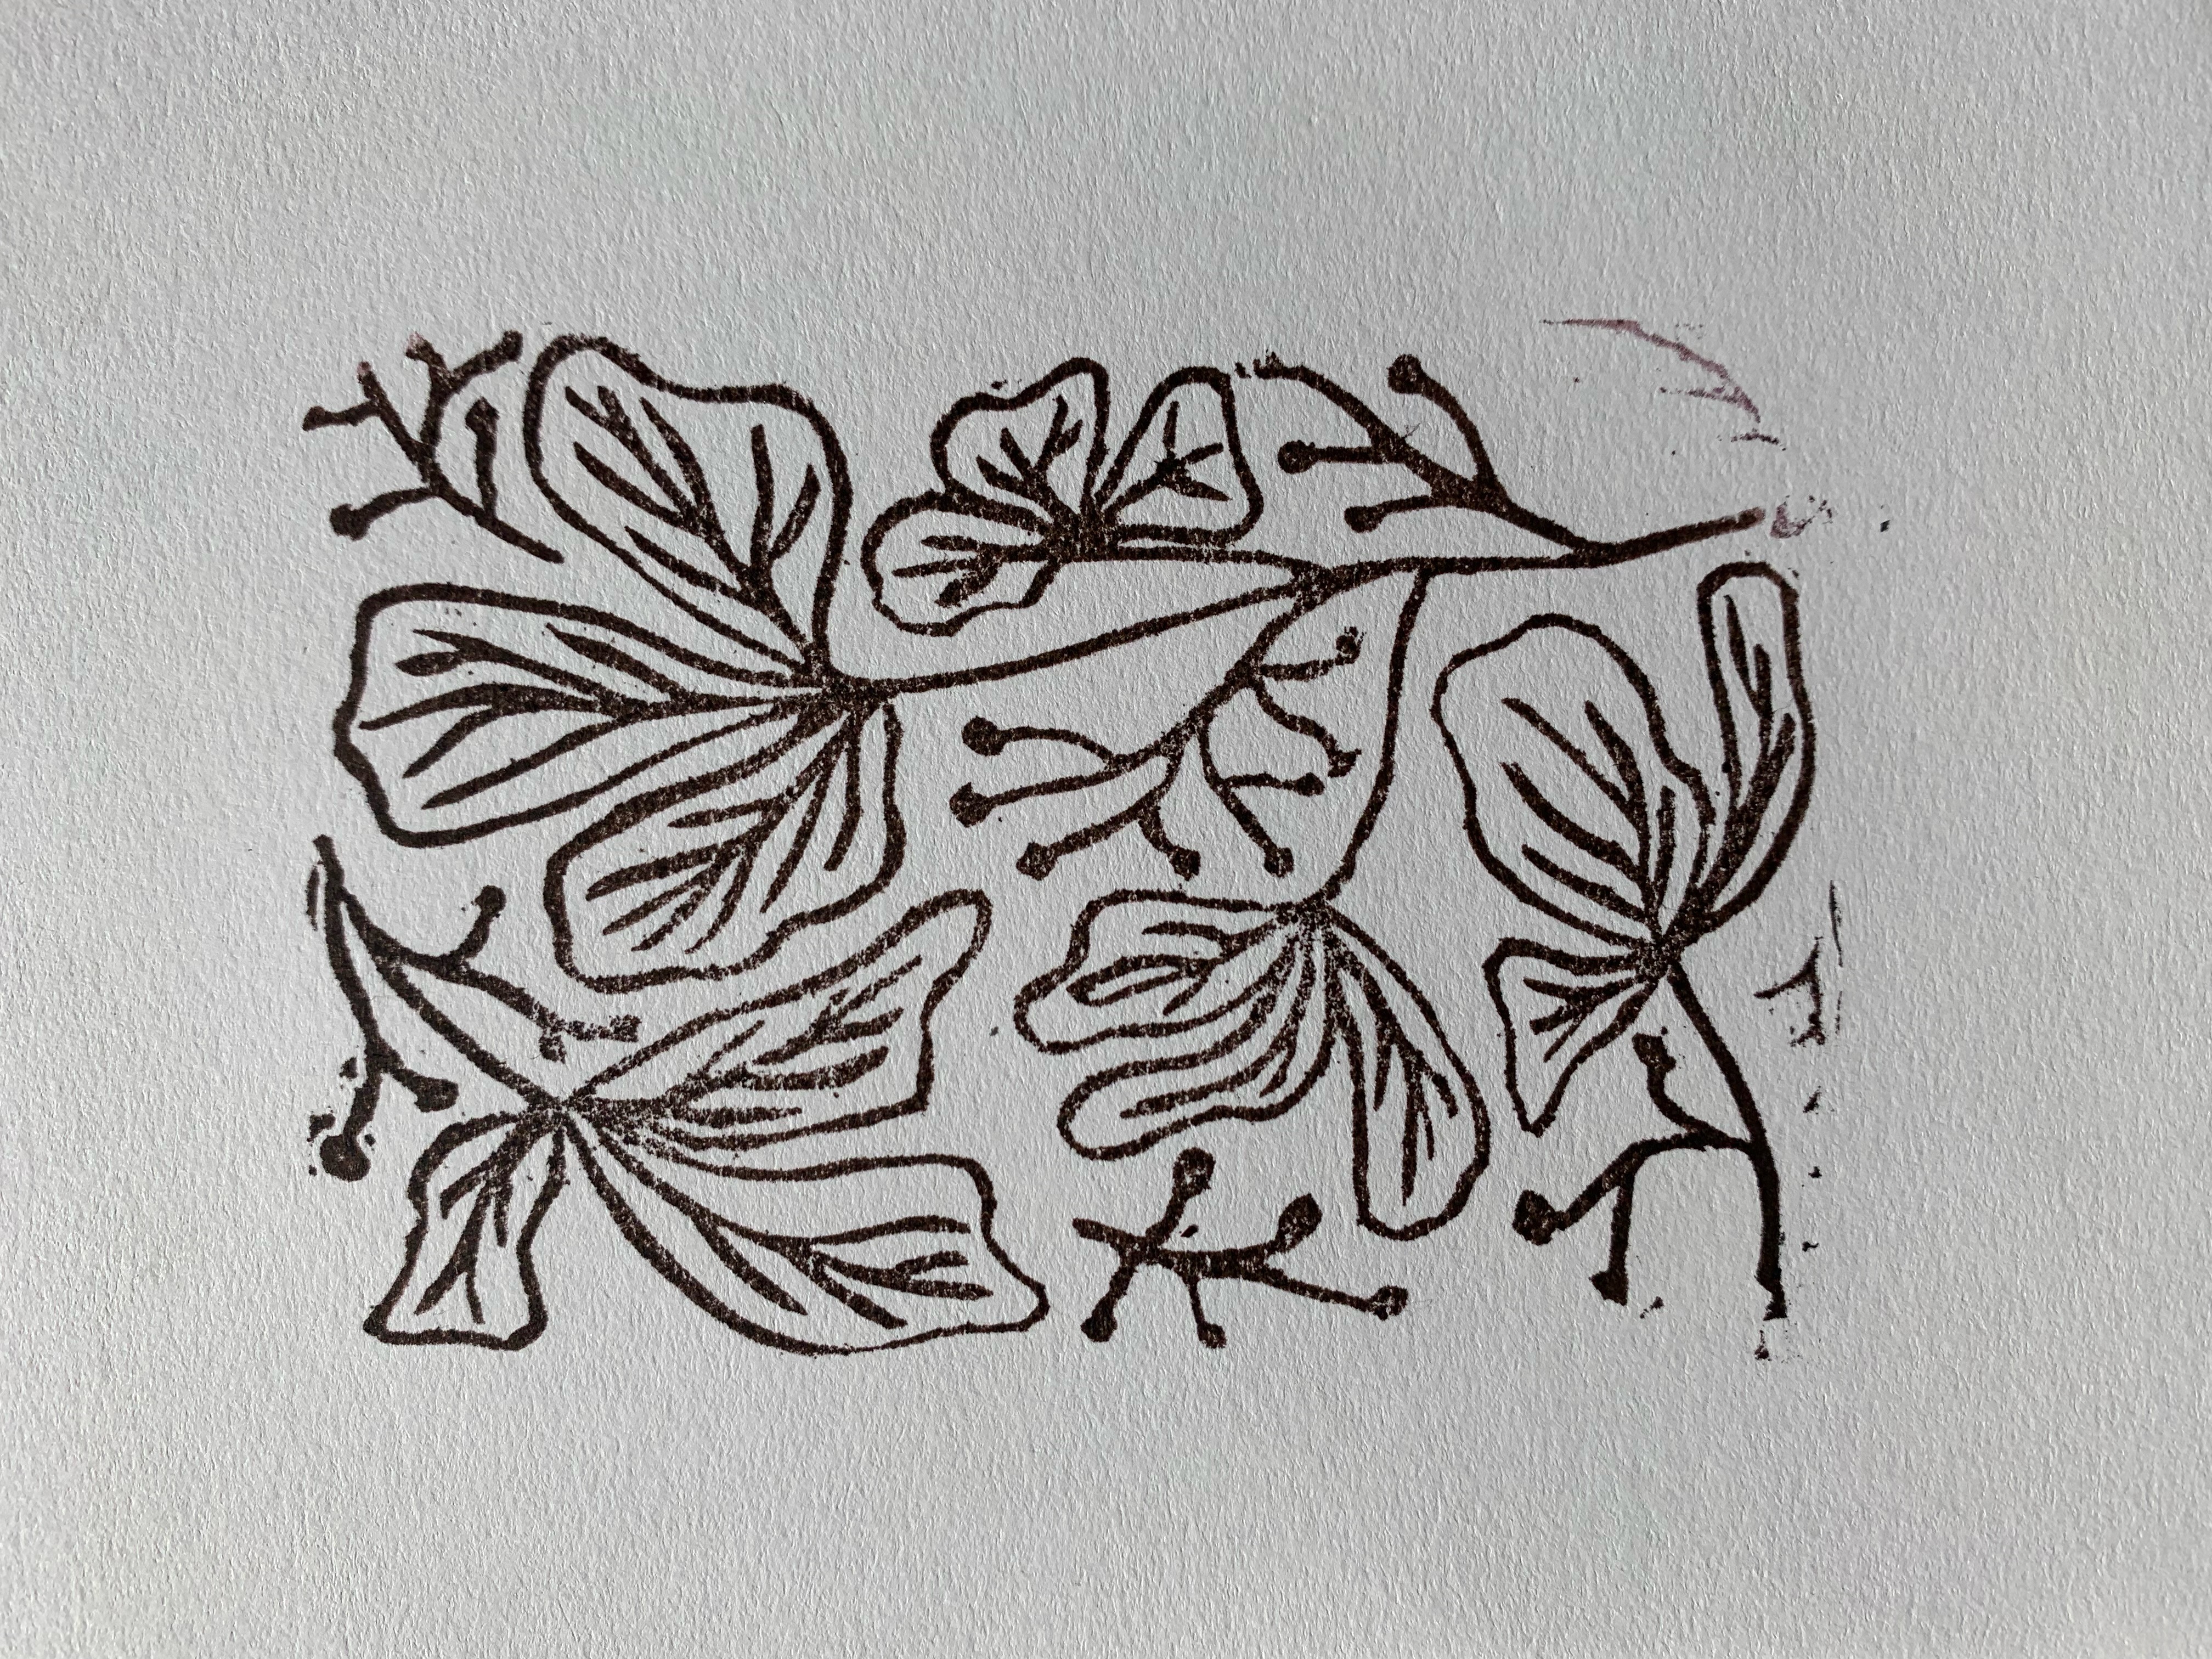 Block print of poison oak in brown ink on white paper.